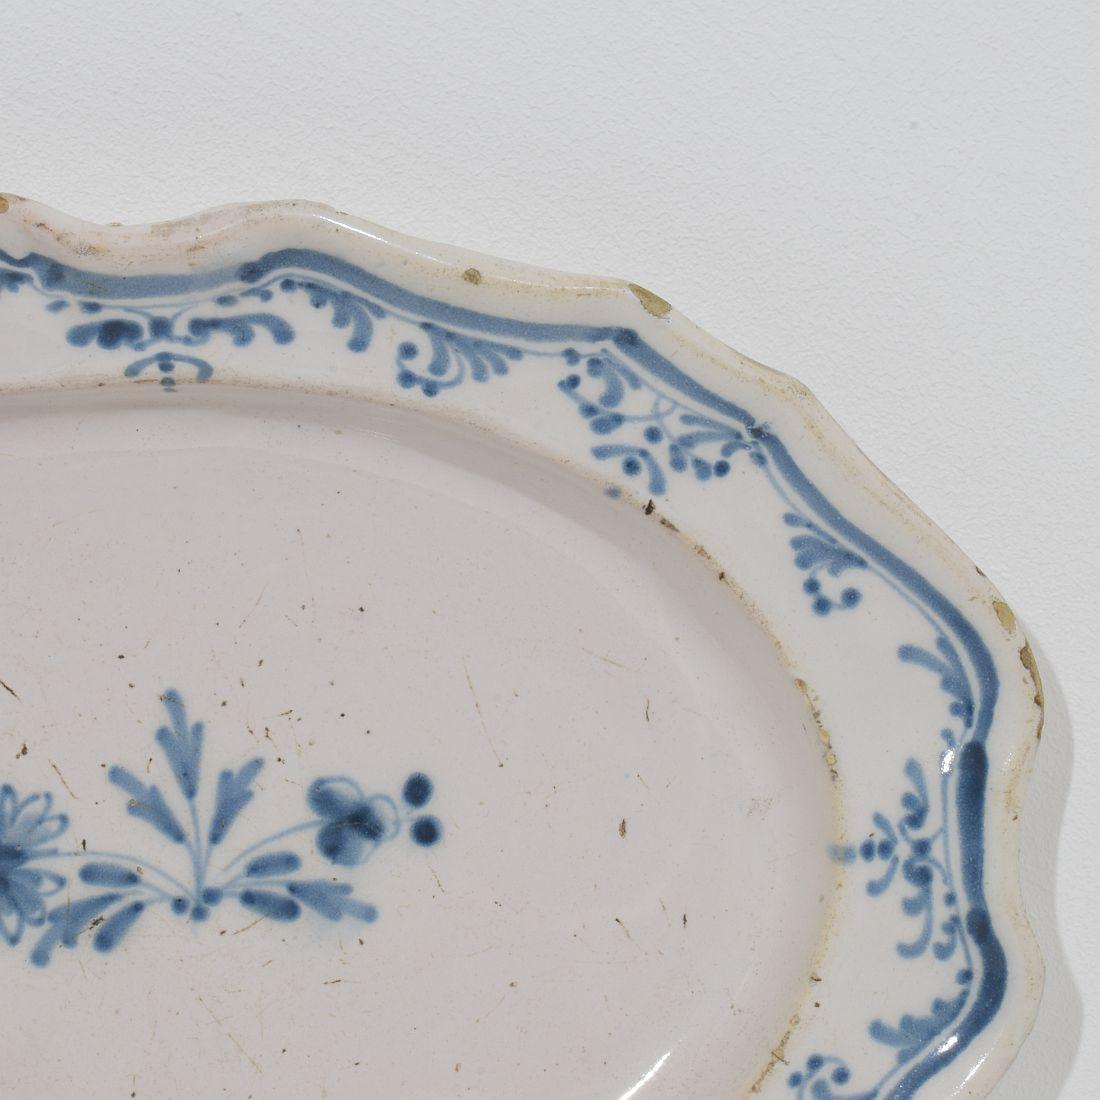 French Provincial French, 18th Century Glazed Earthenware Rouen Platter For Sale